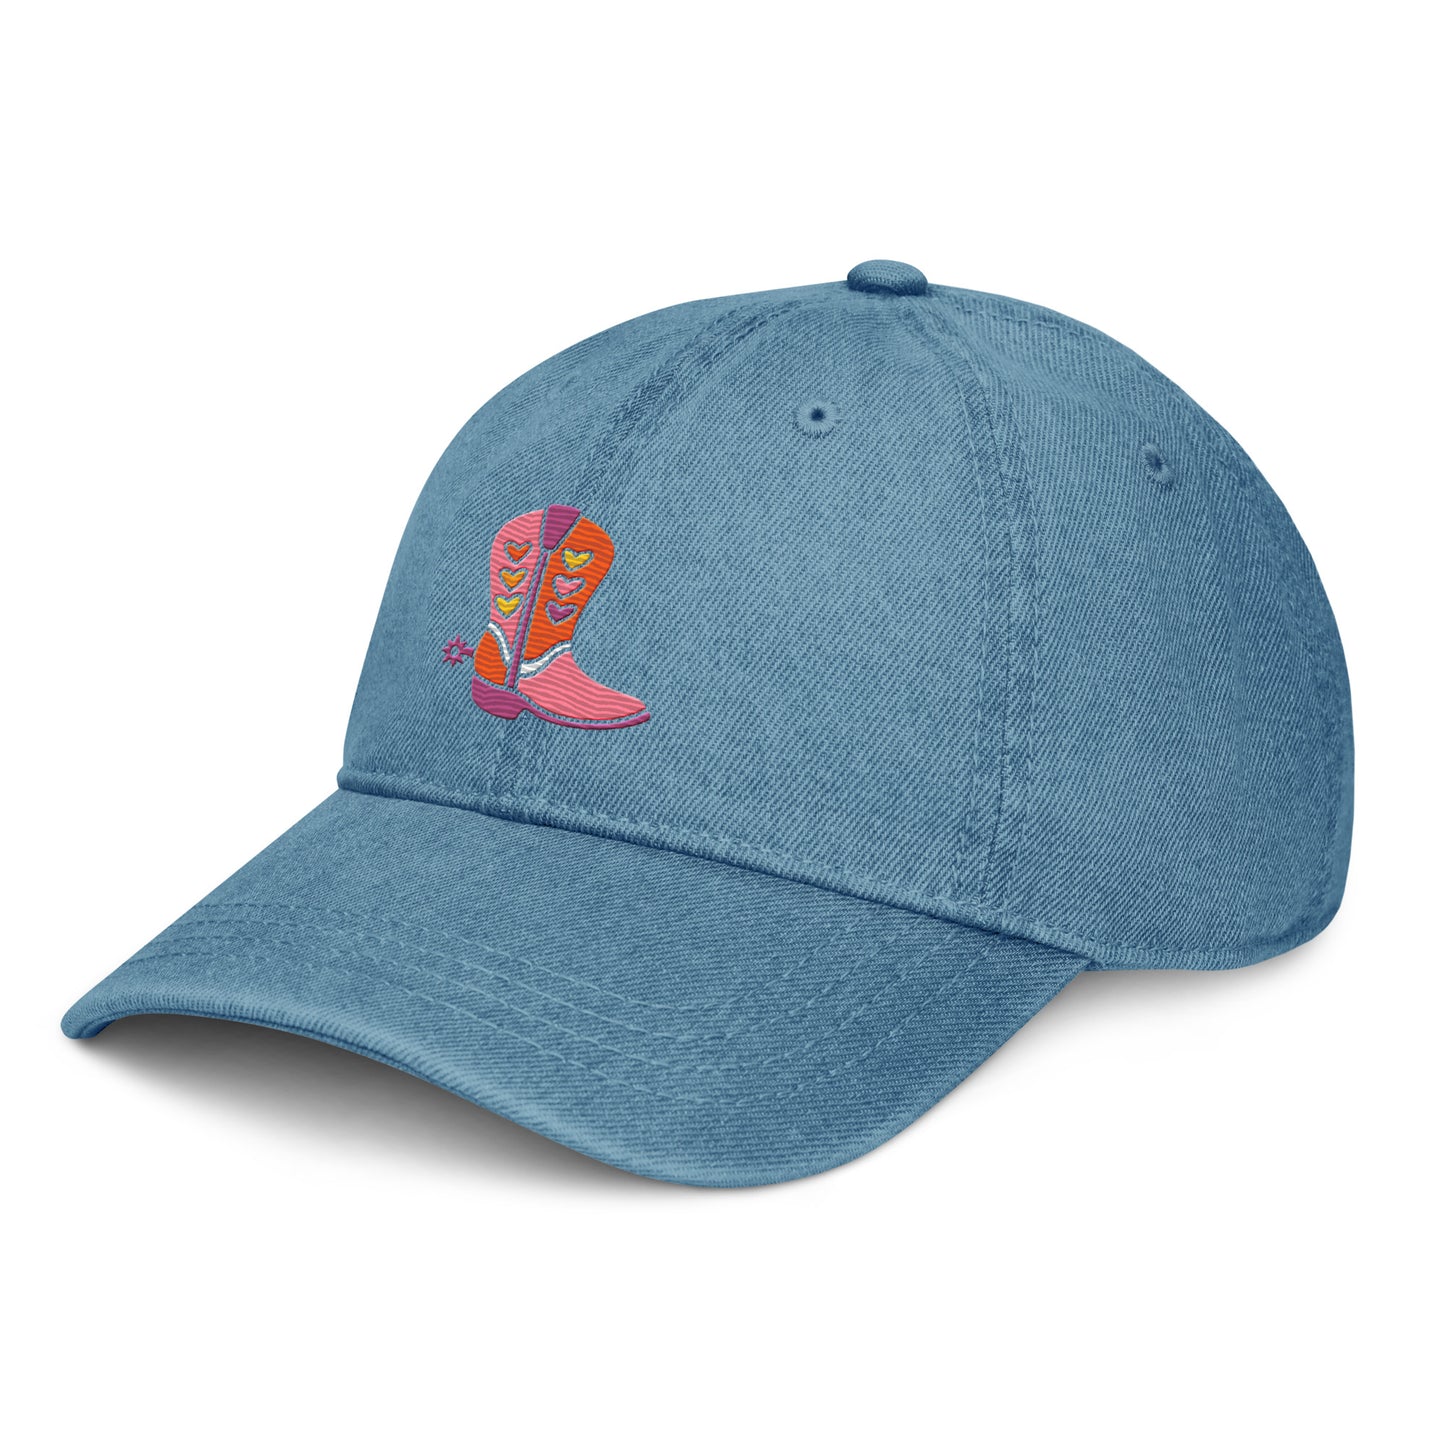 These Boots Denim Hat